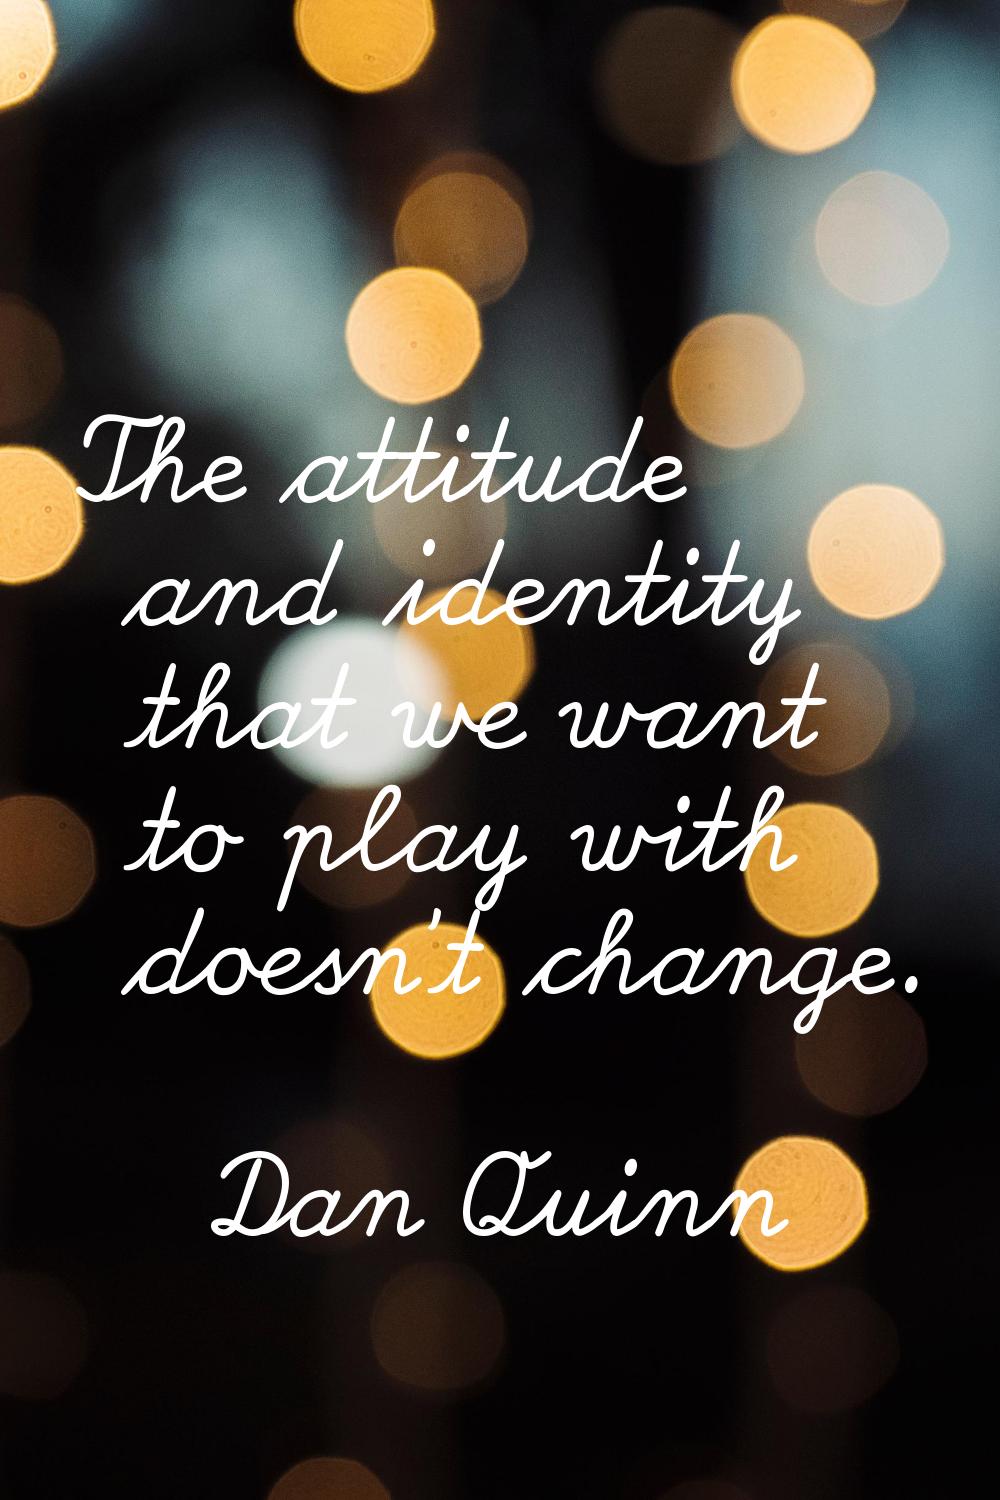 The attitude and identity that we want to play with doesn't change.